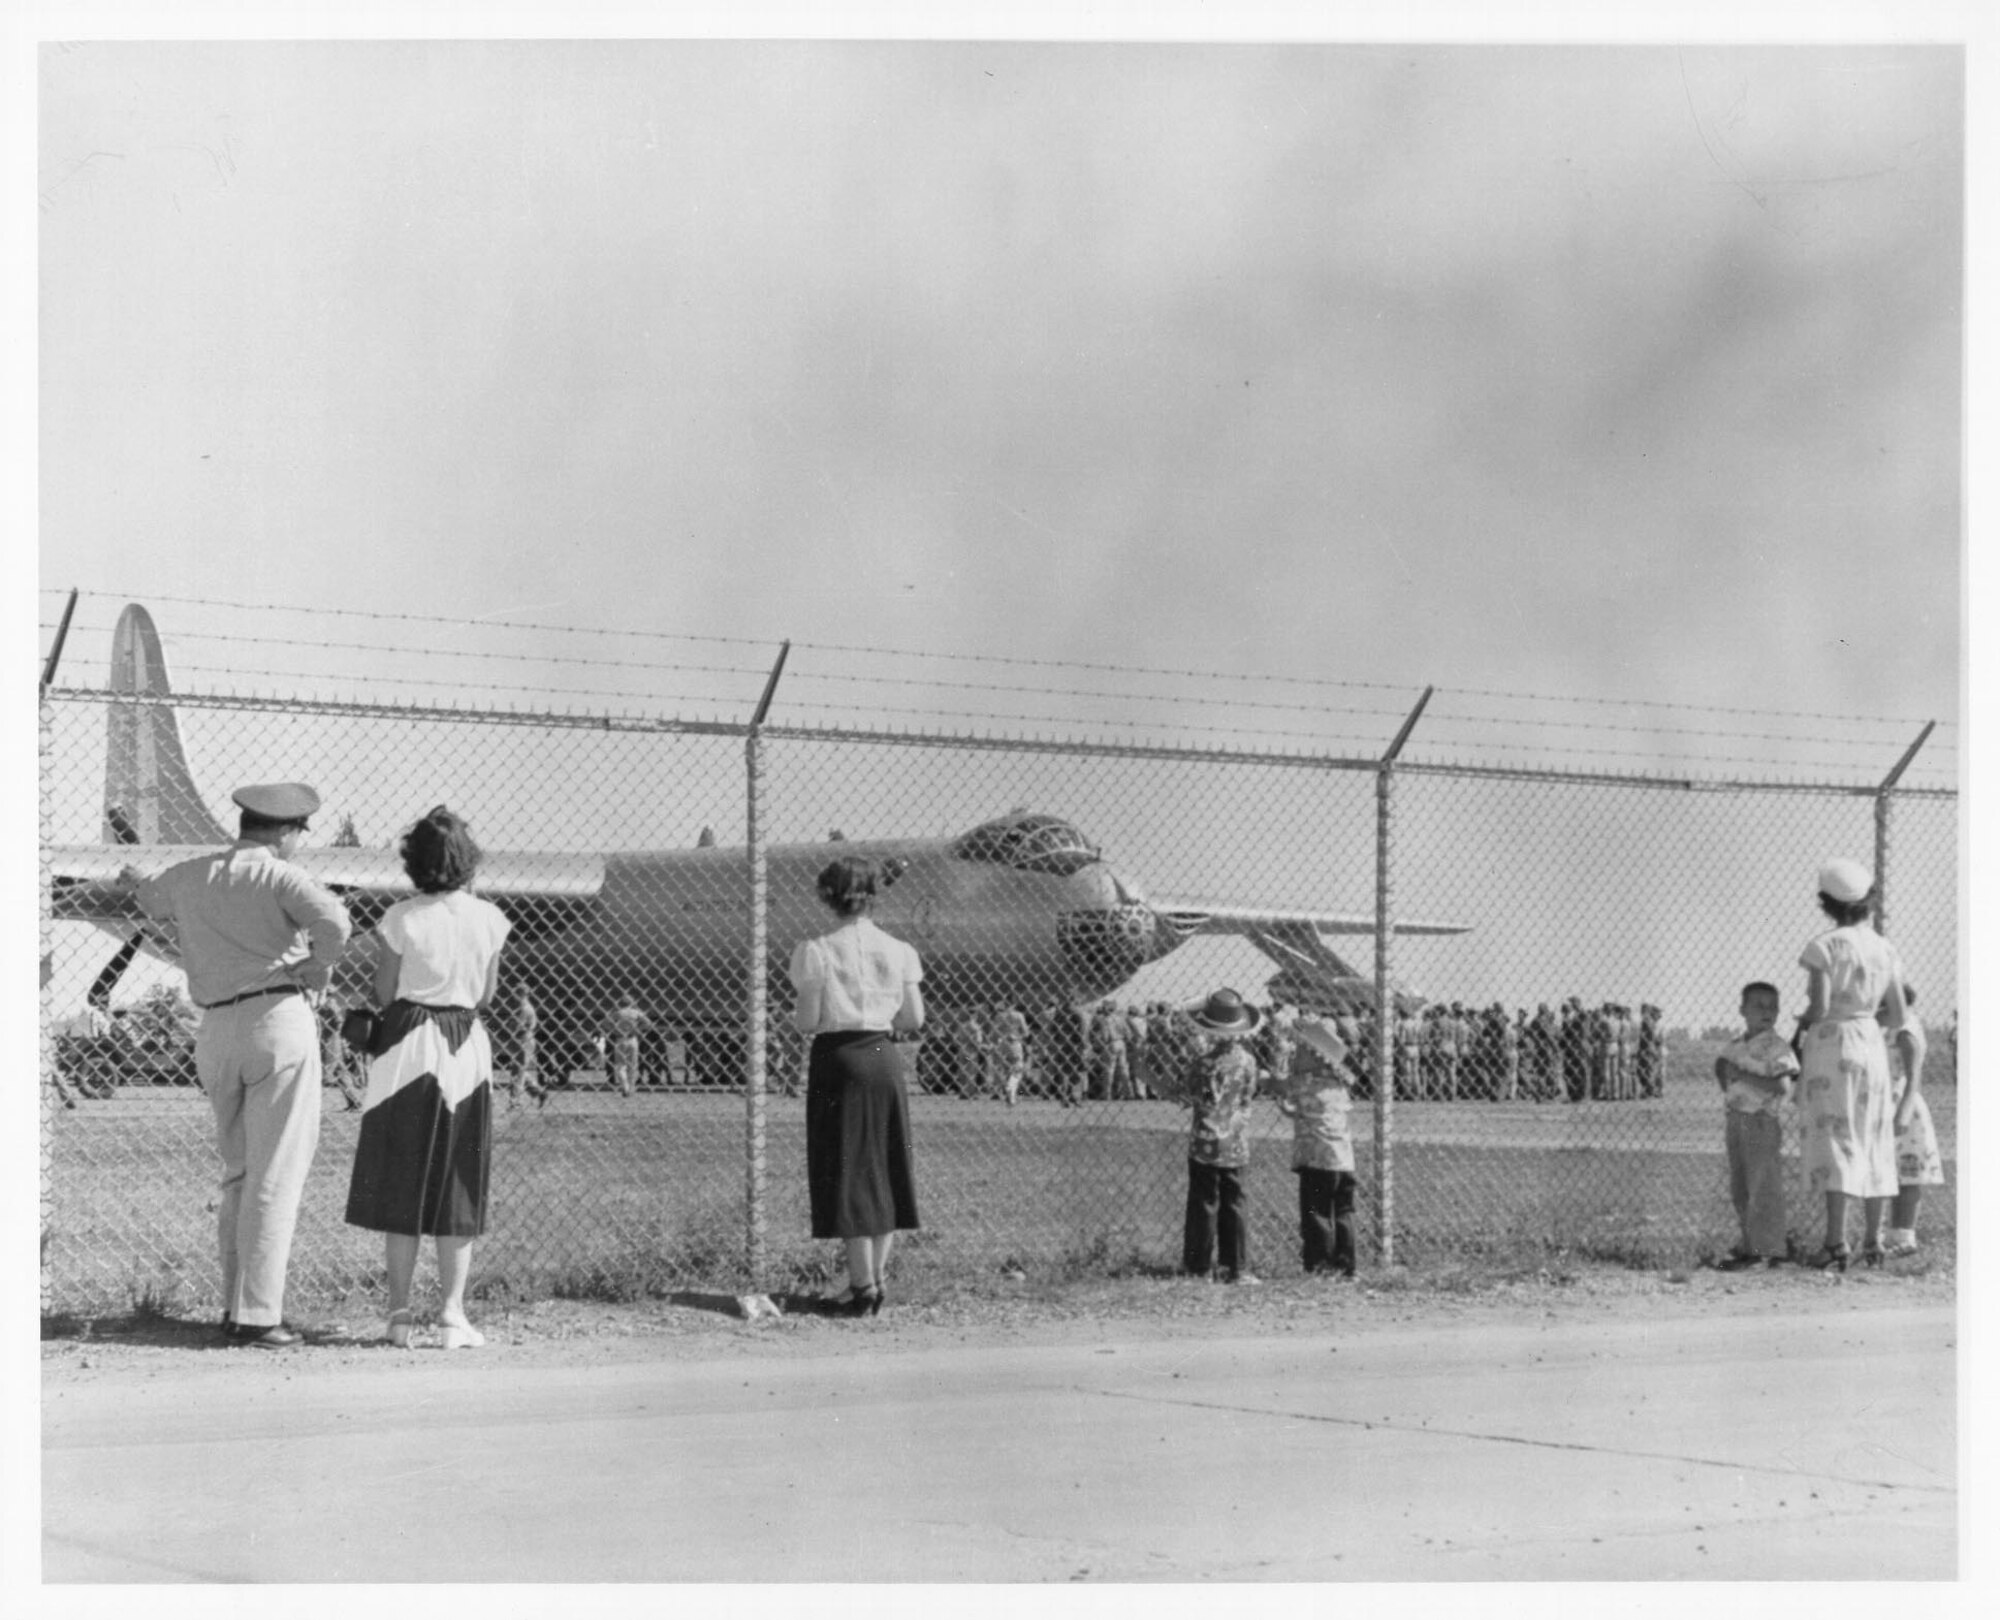 People celebrate the arrival of the first B-36 Peacemaker at Fairchild in 1951. The B-36 replaced the B-29 and remained at Fairchild until 1956 when it was replaced by the all-jet B-52 Stratofortress. (Courtesy photo)